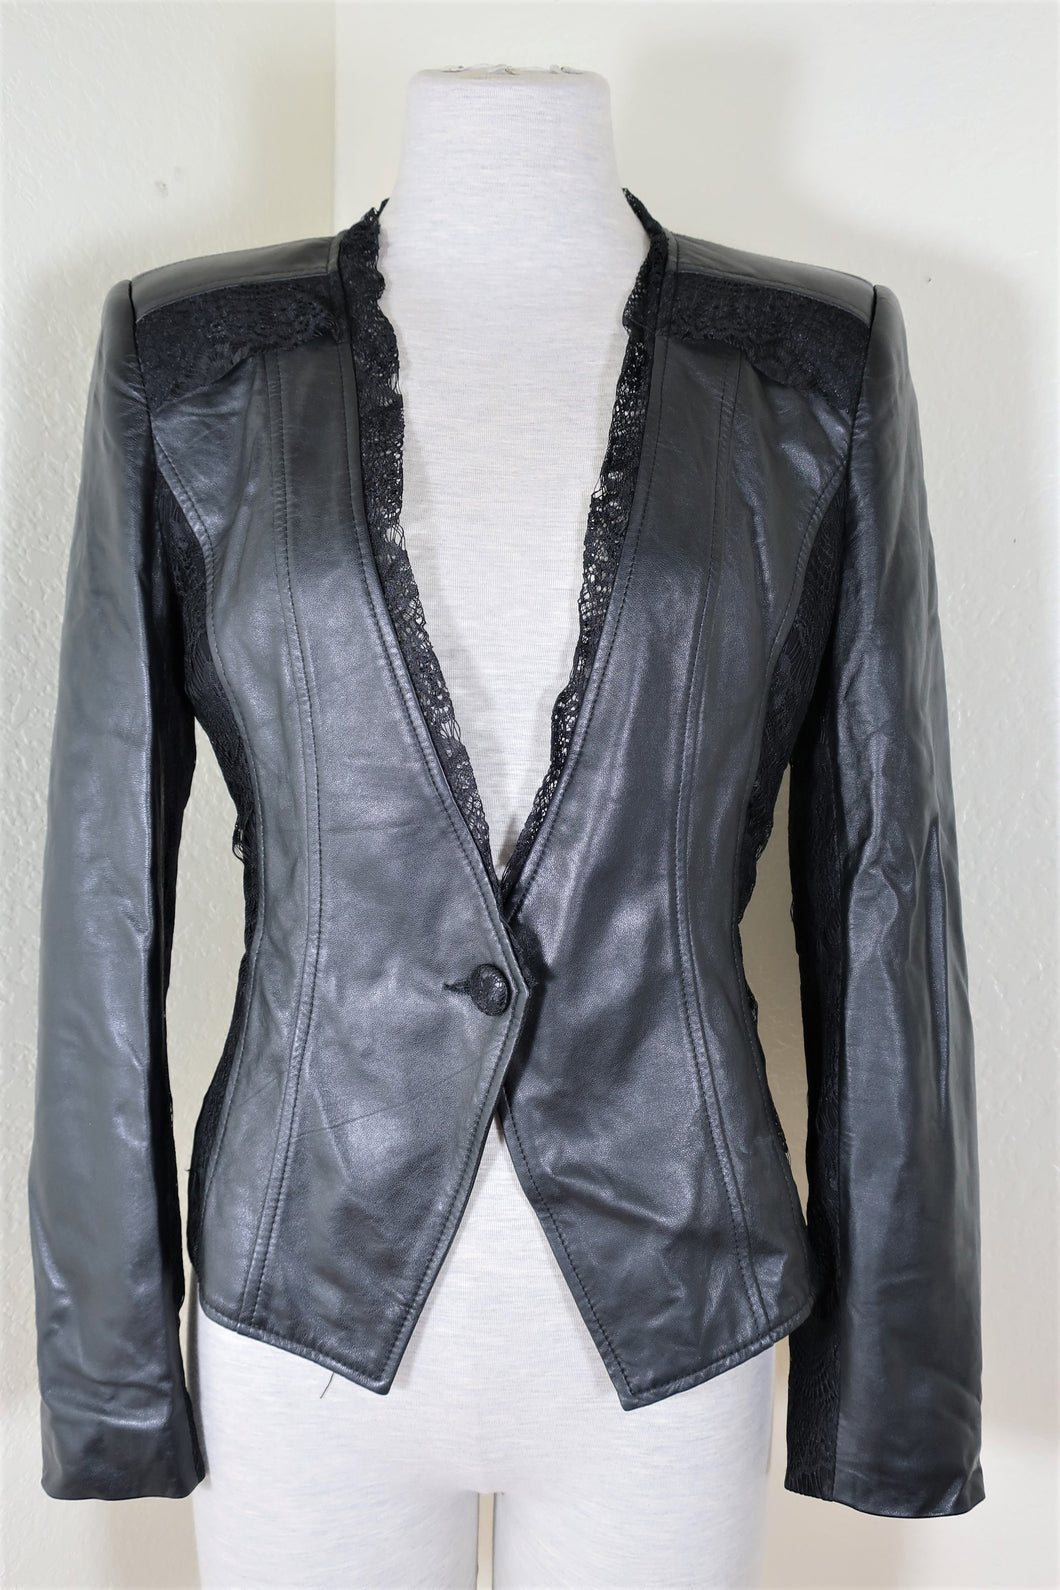 Rare ALEXANDER McQUEEN Black Lambskin Motorcycle Leather Lace Jacket Small 40 4 5 6